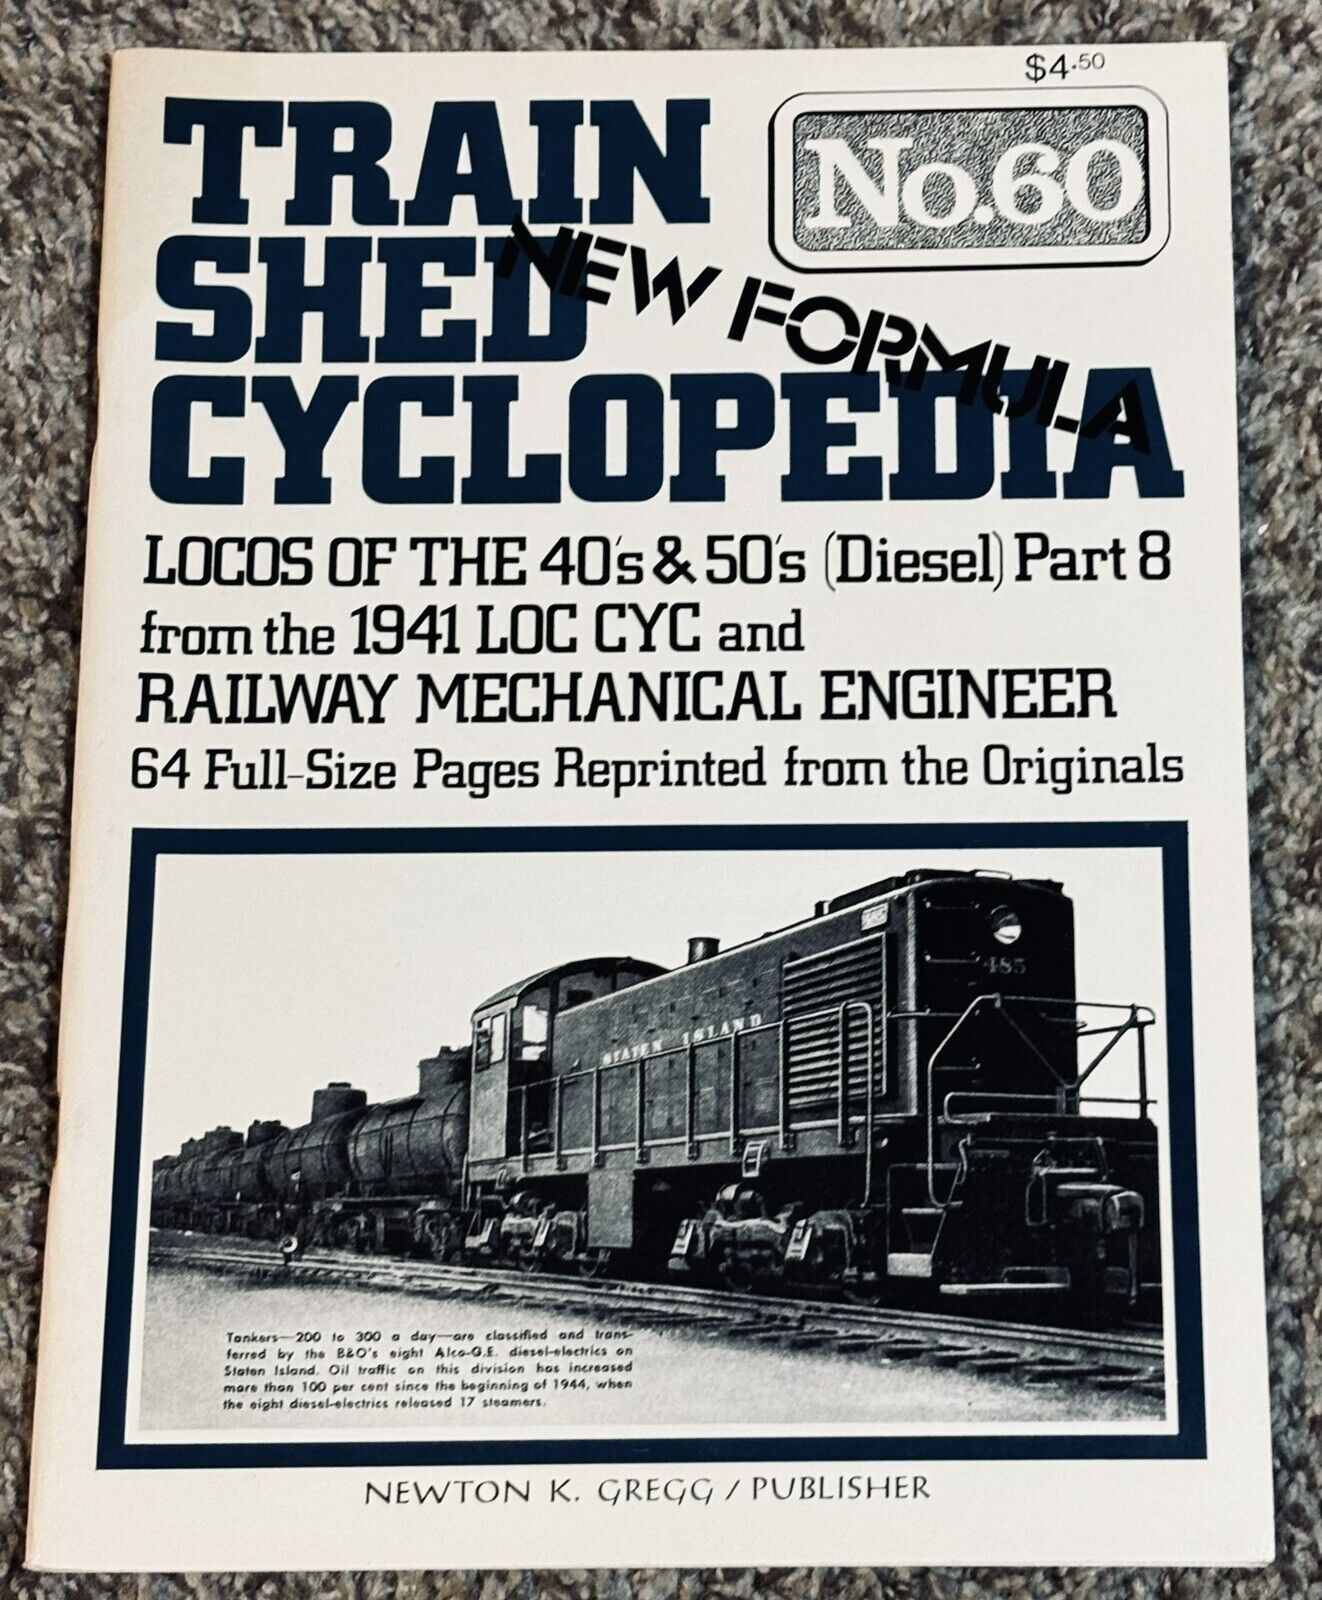 Train Shed Cyclopedia #60 Locos of the ‘40’s and 50’s Part 8